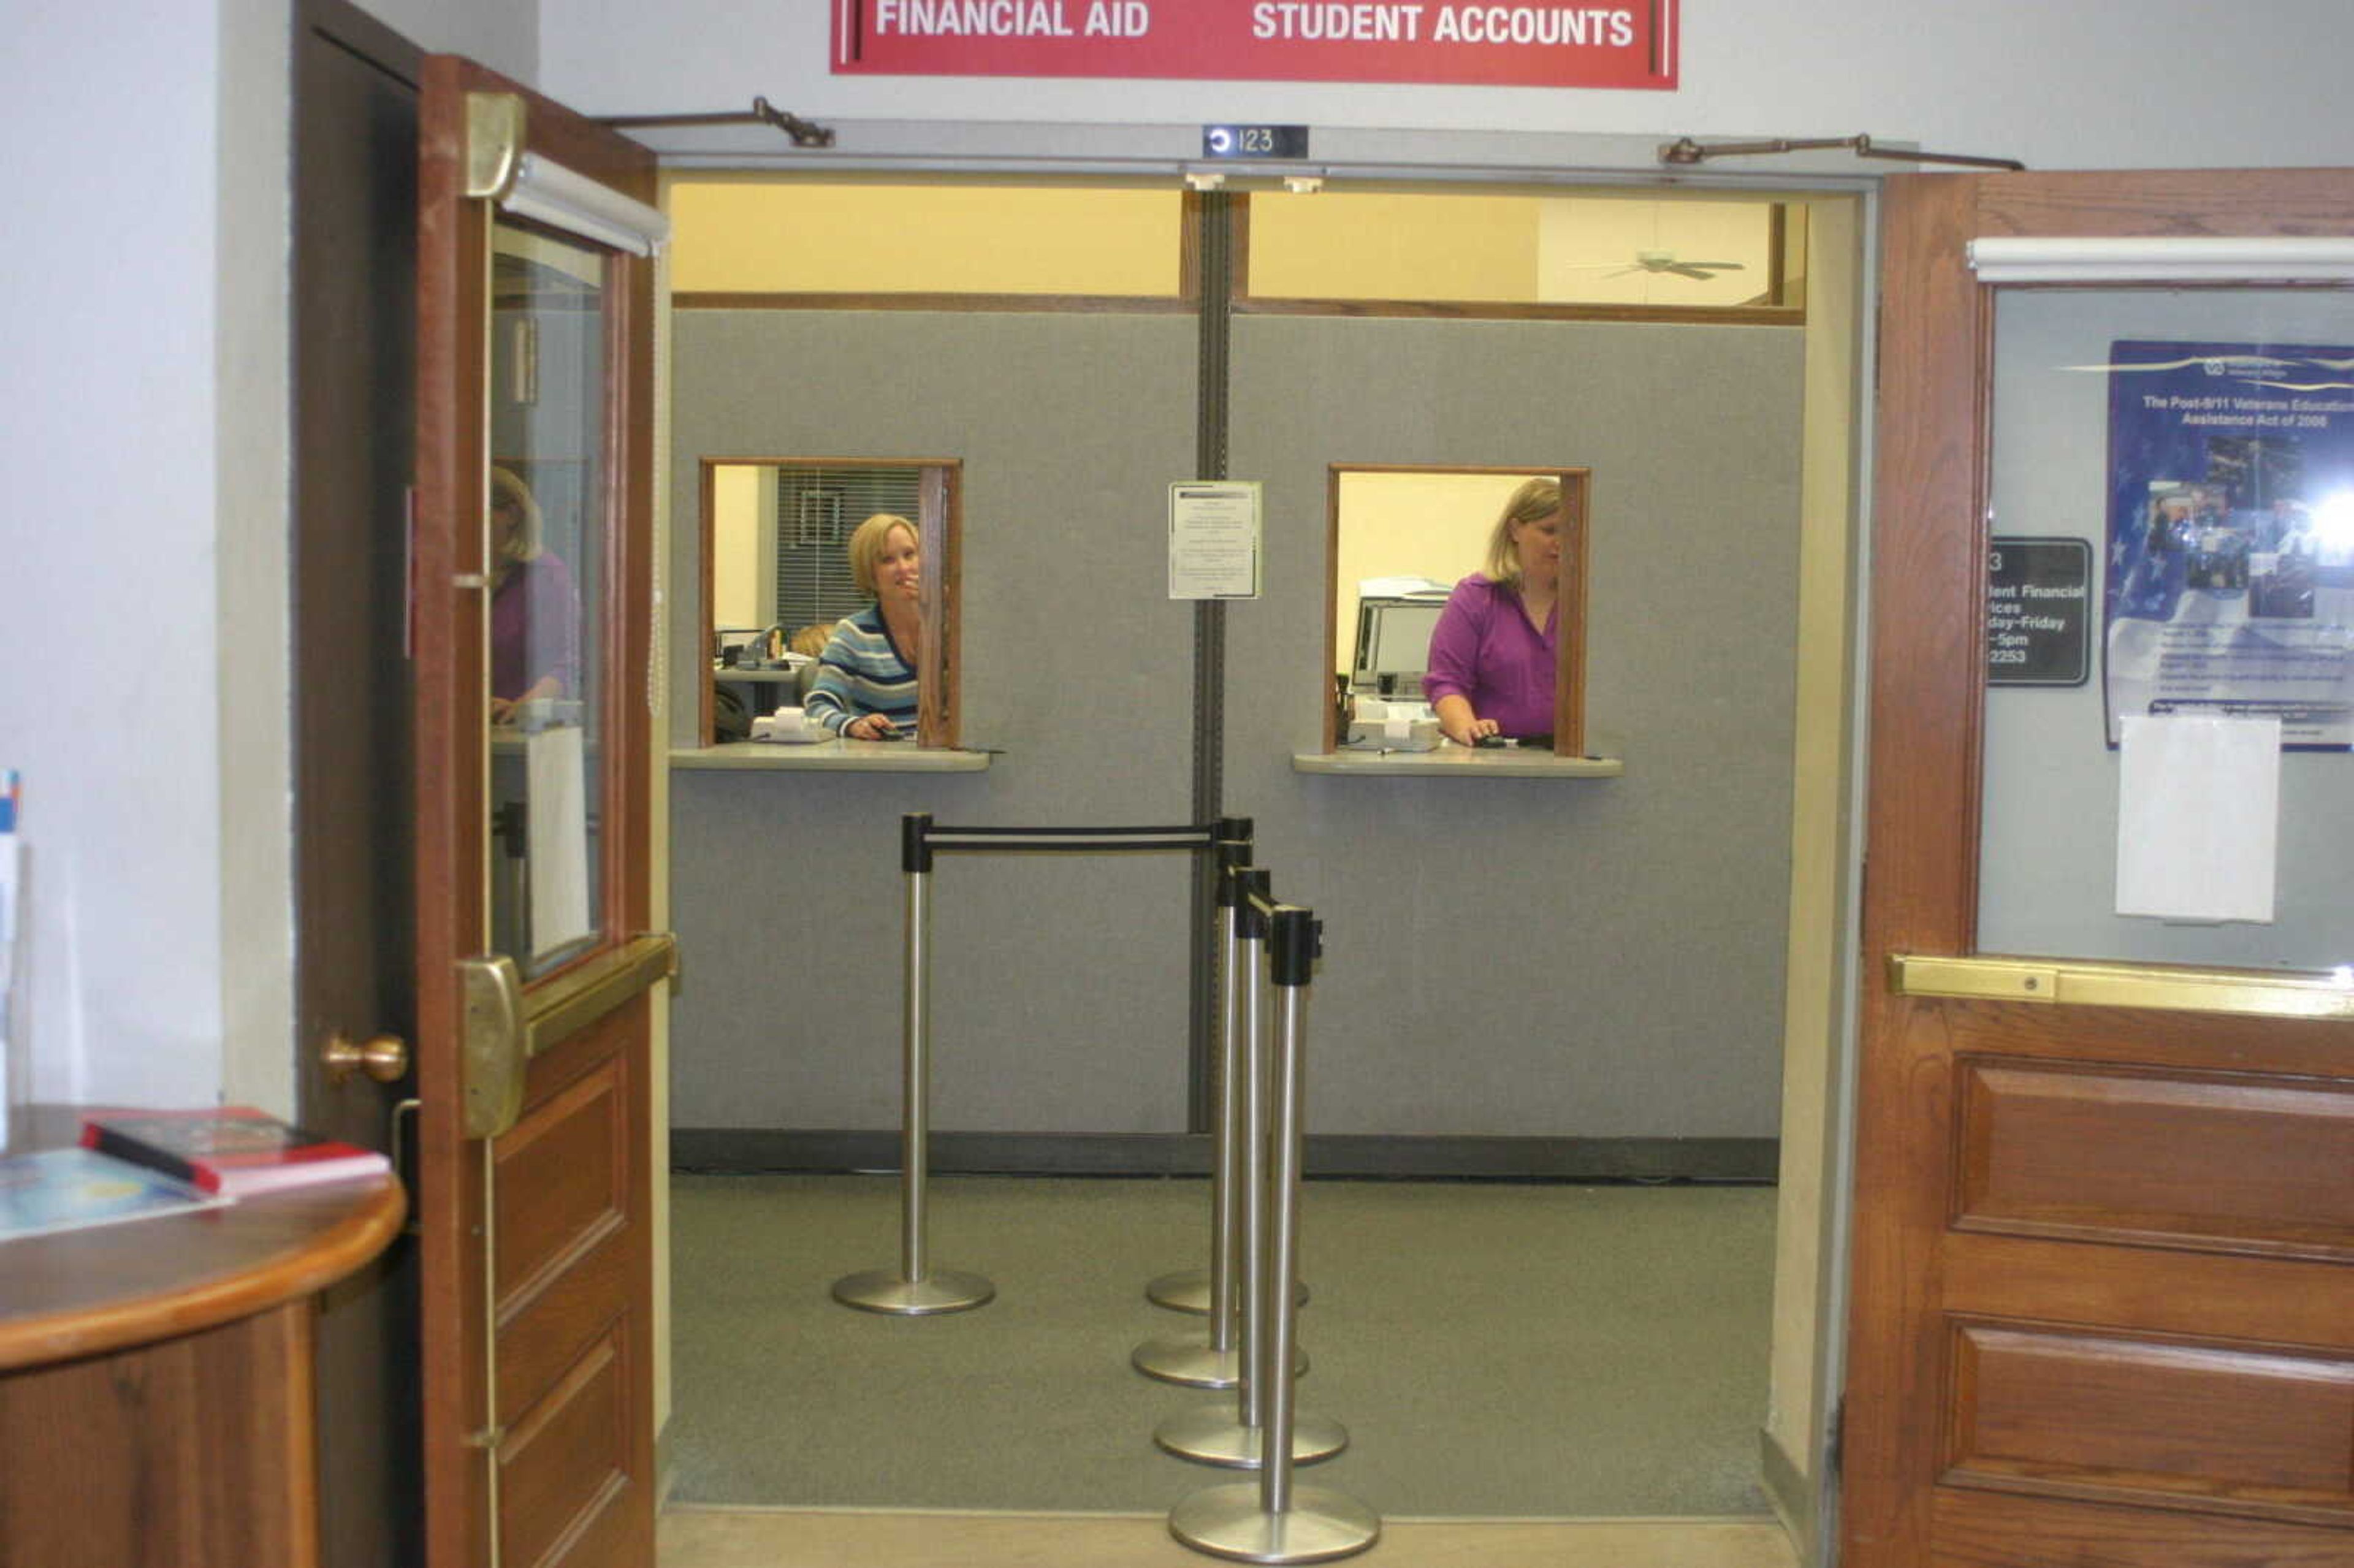 Student financial services is located in room 123 in Academic Hall. - Photos by Dan Fox